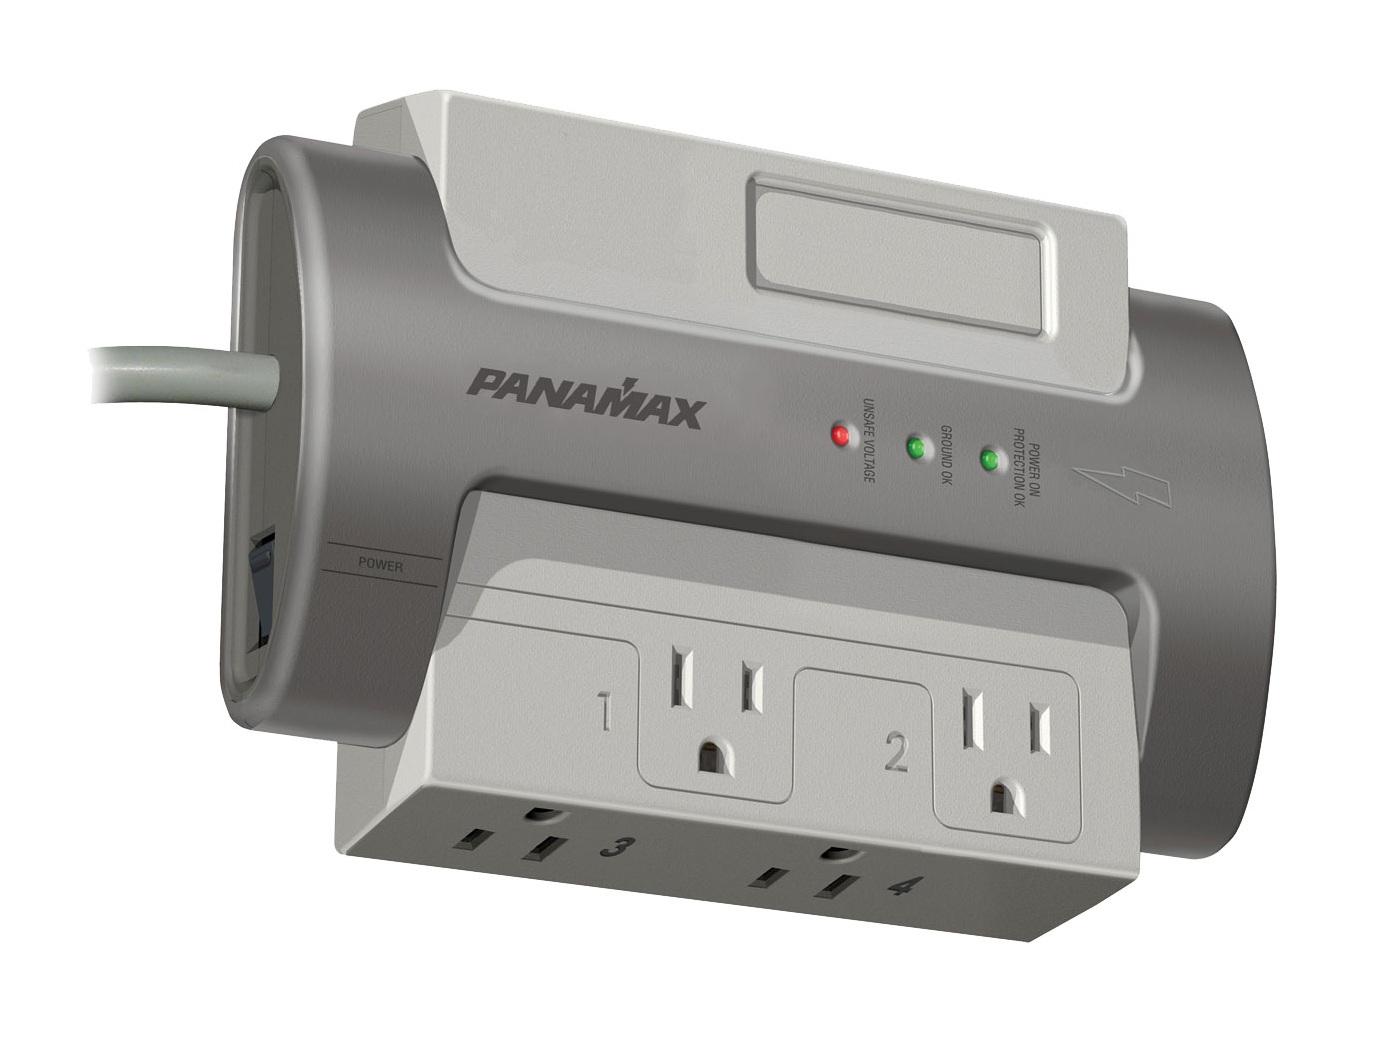 M4-EX Noise Filtration/Surge Protection For All Home/Office Equipment by Panamax